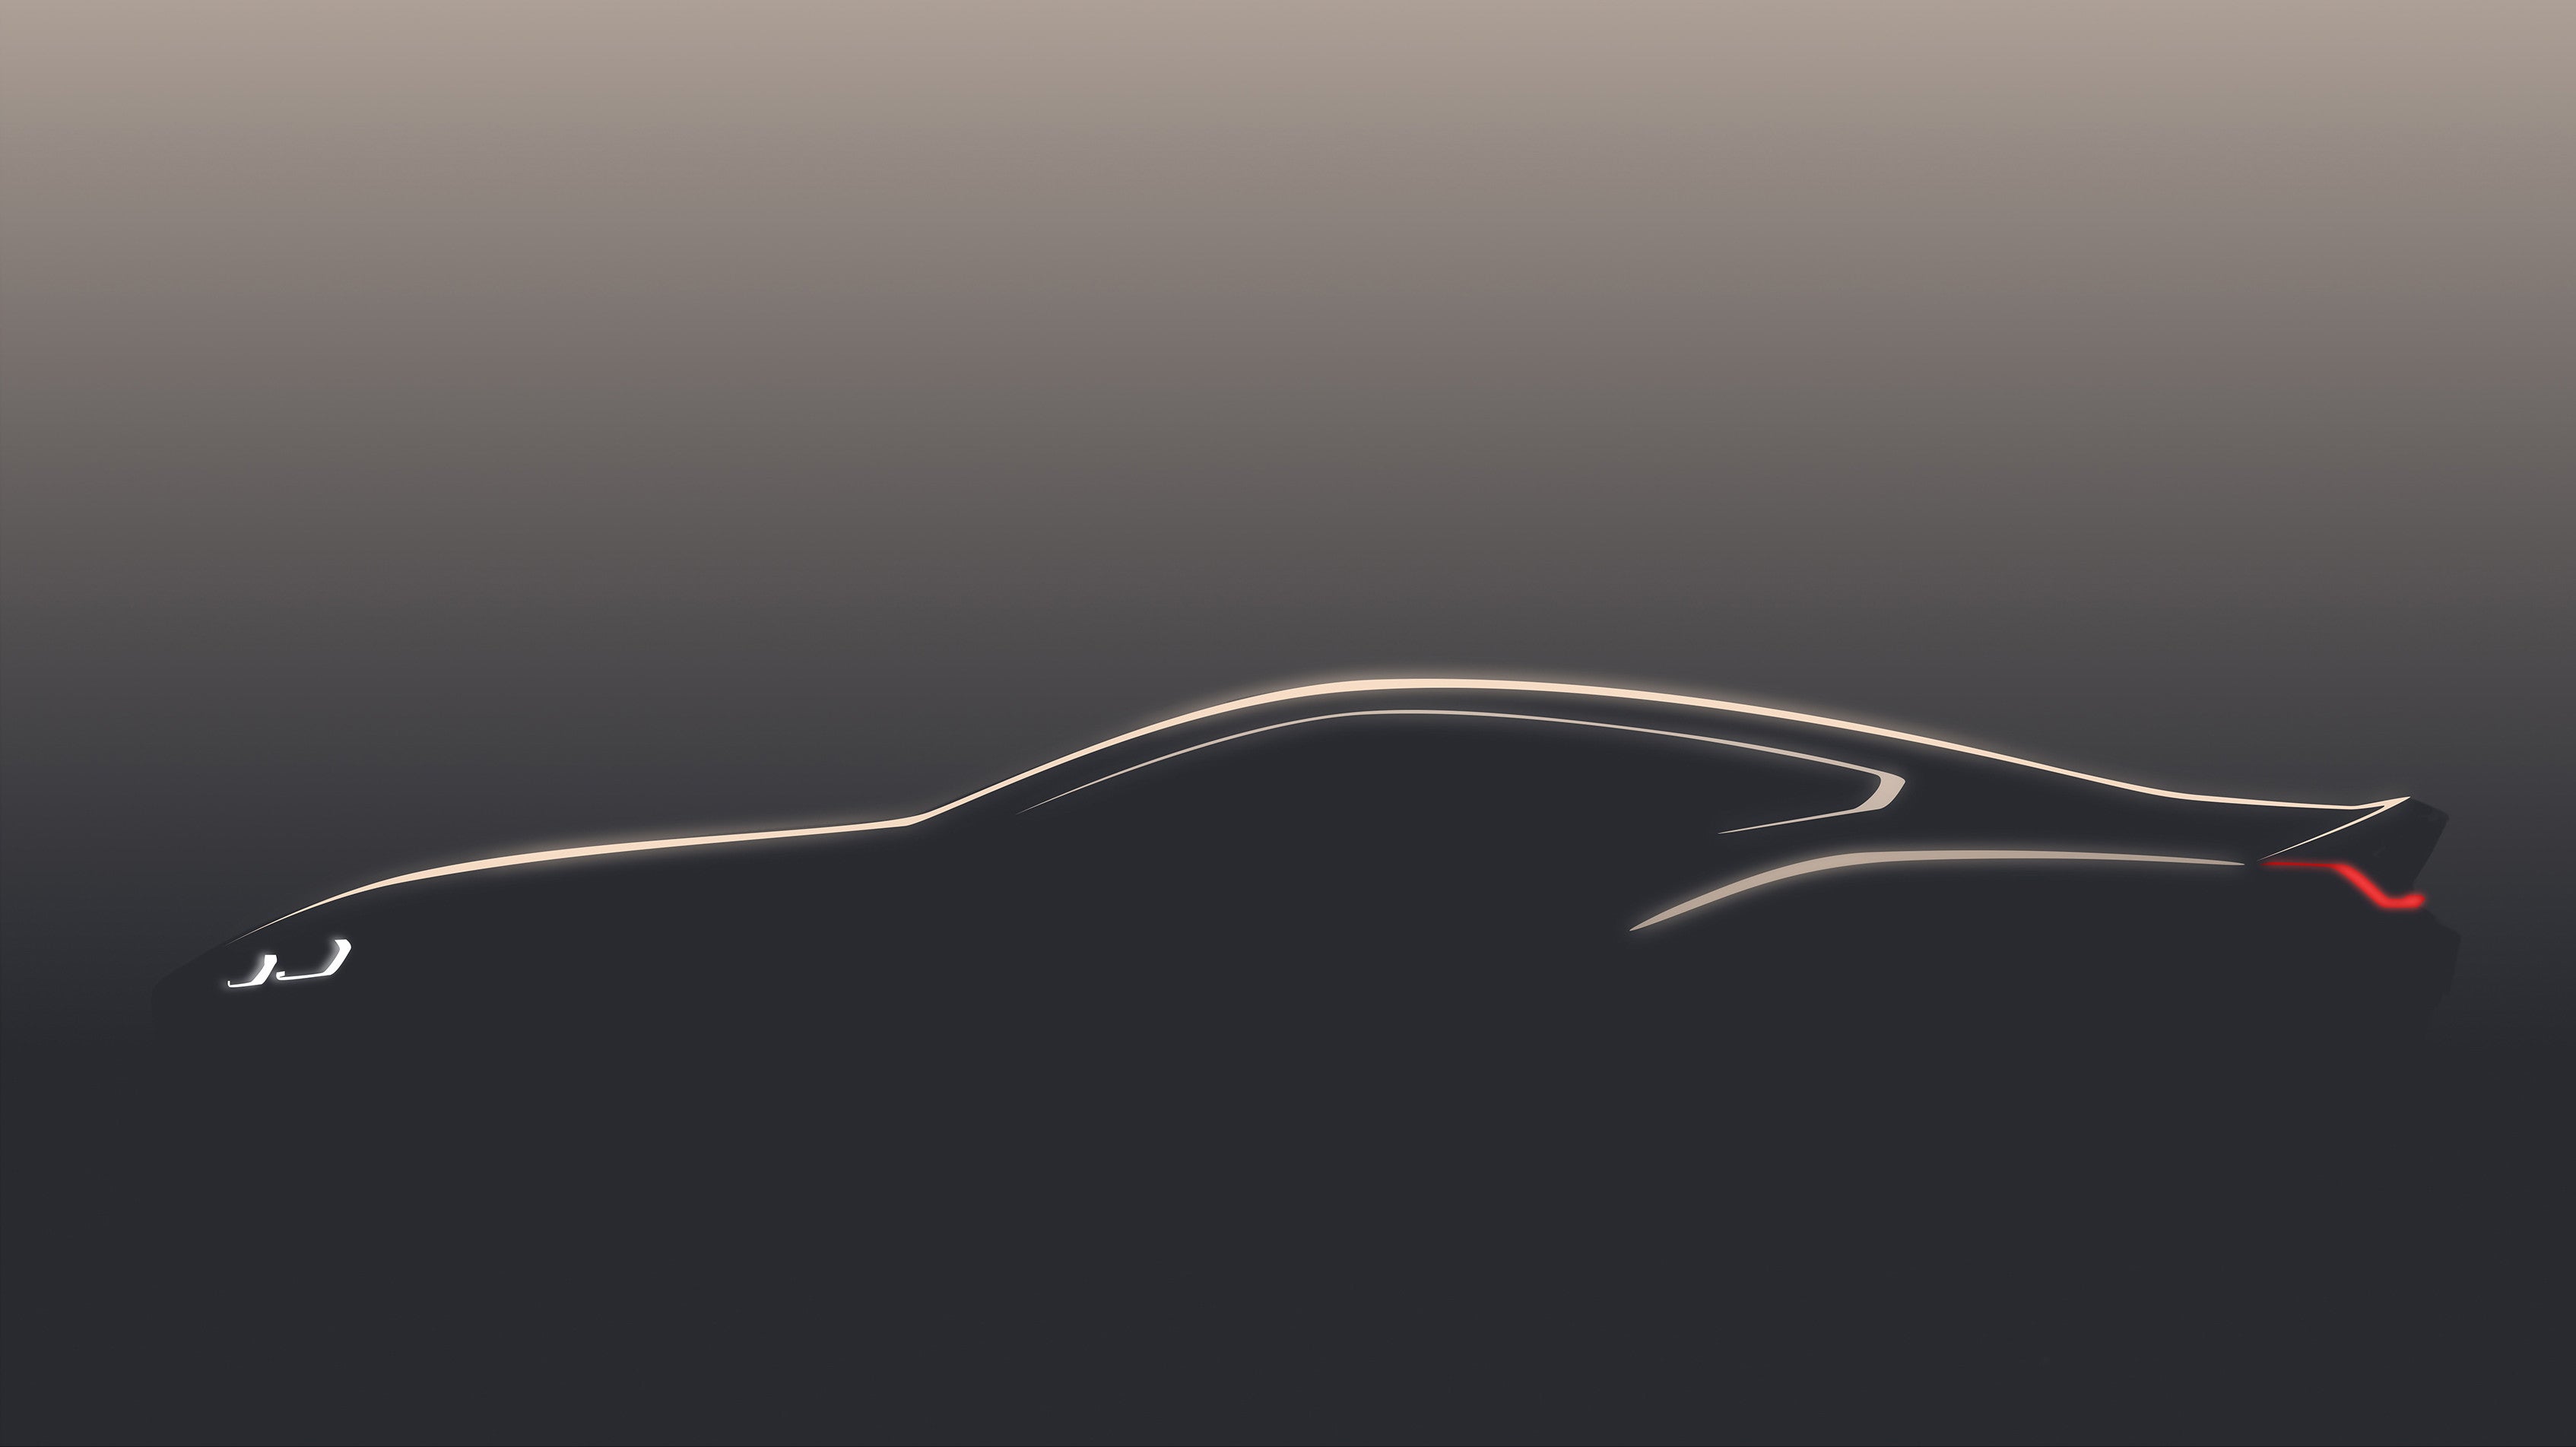 BMW's 8 Series Coupe teased!